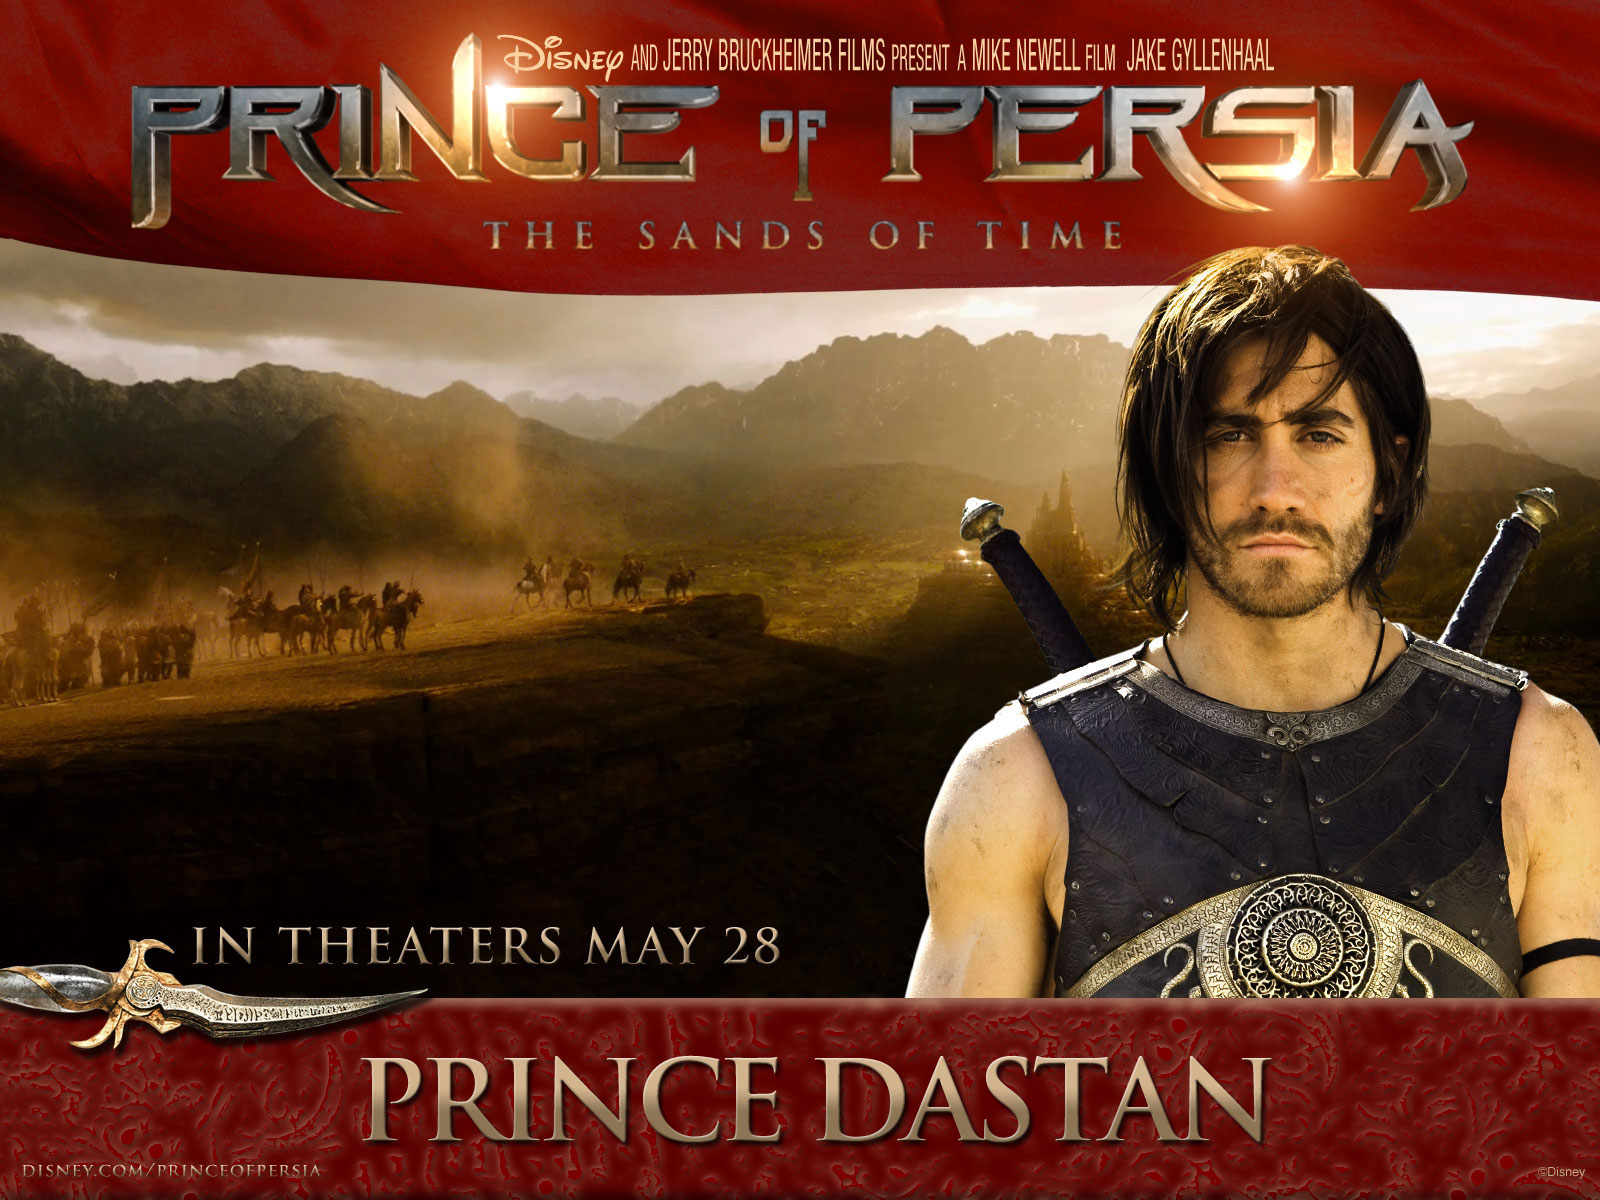 Prince of Persia: The Sands of Time (film)  Prince of persia, Prince of persia  movie, Movie wallpapers